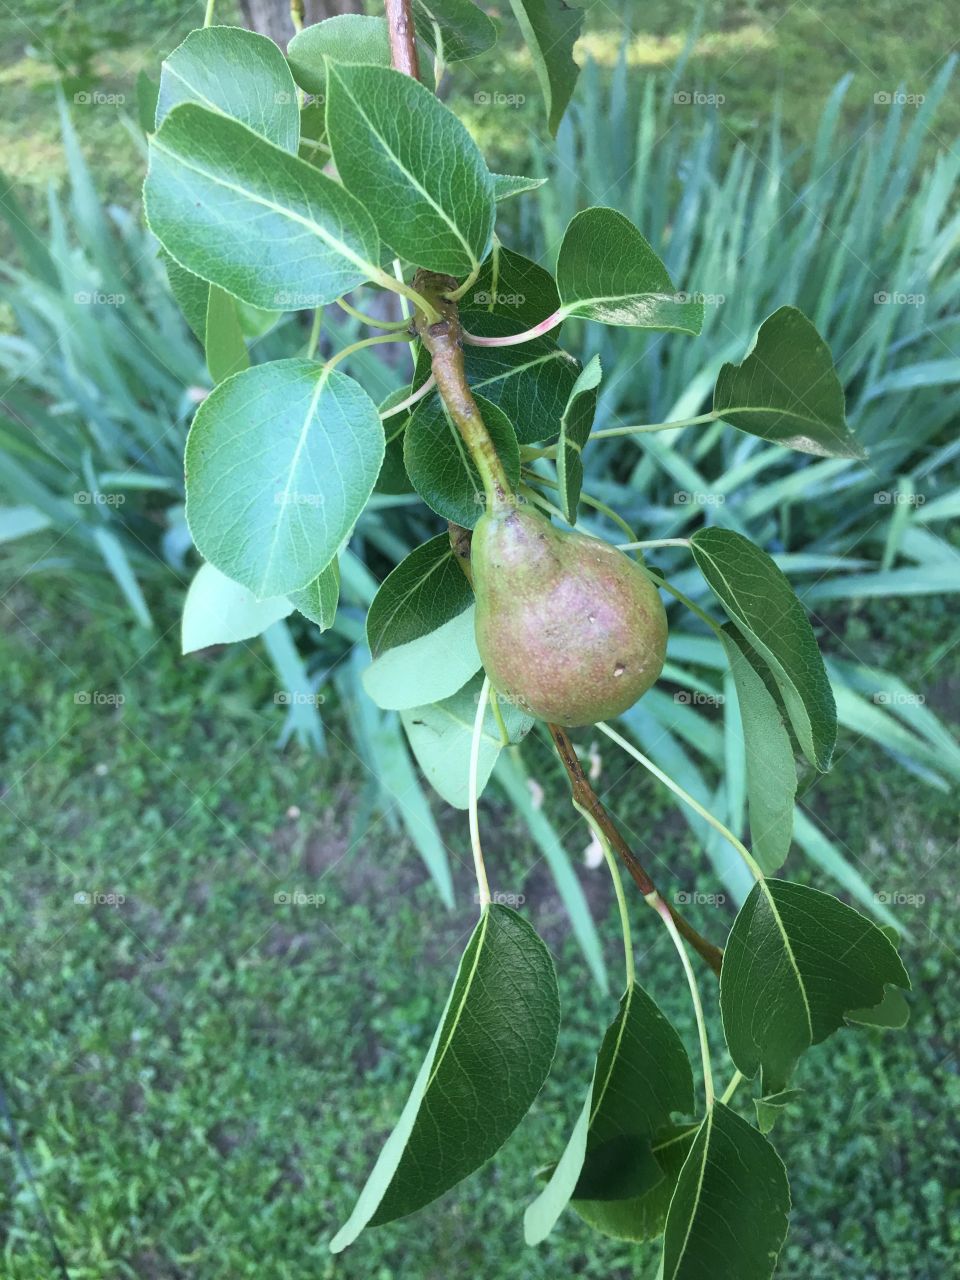 Pear growing on the tree